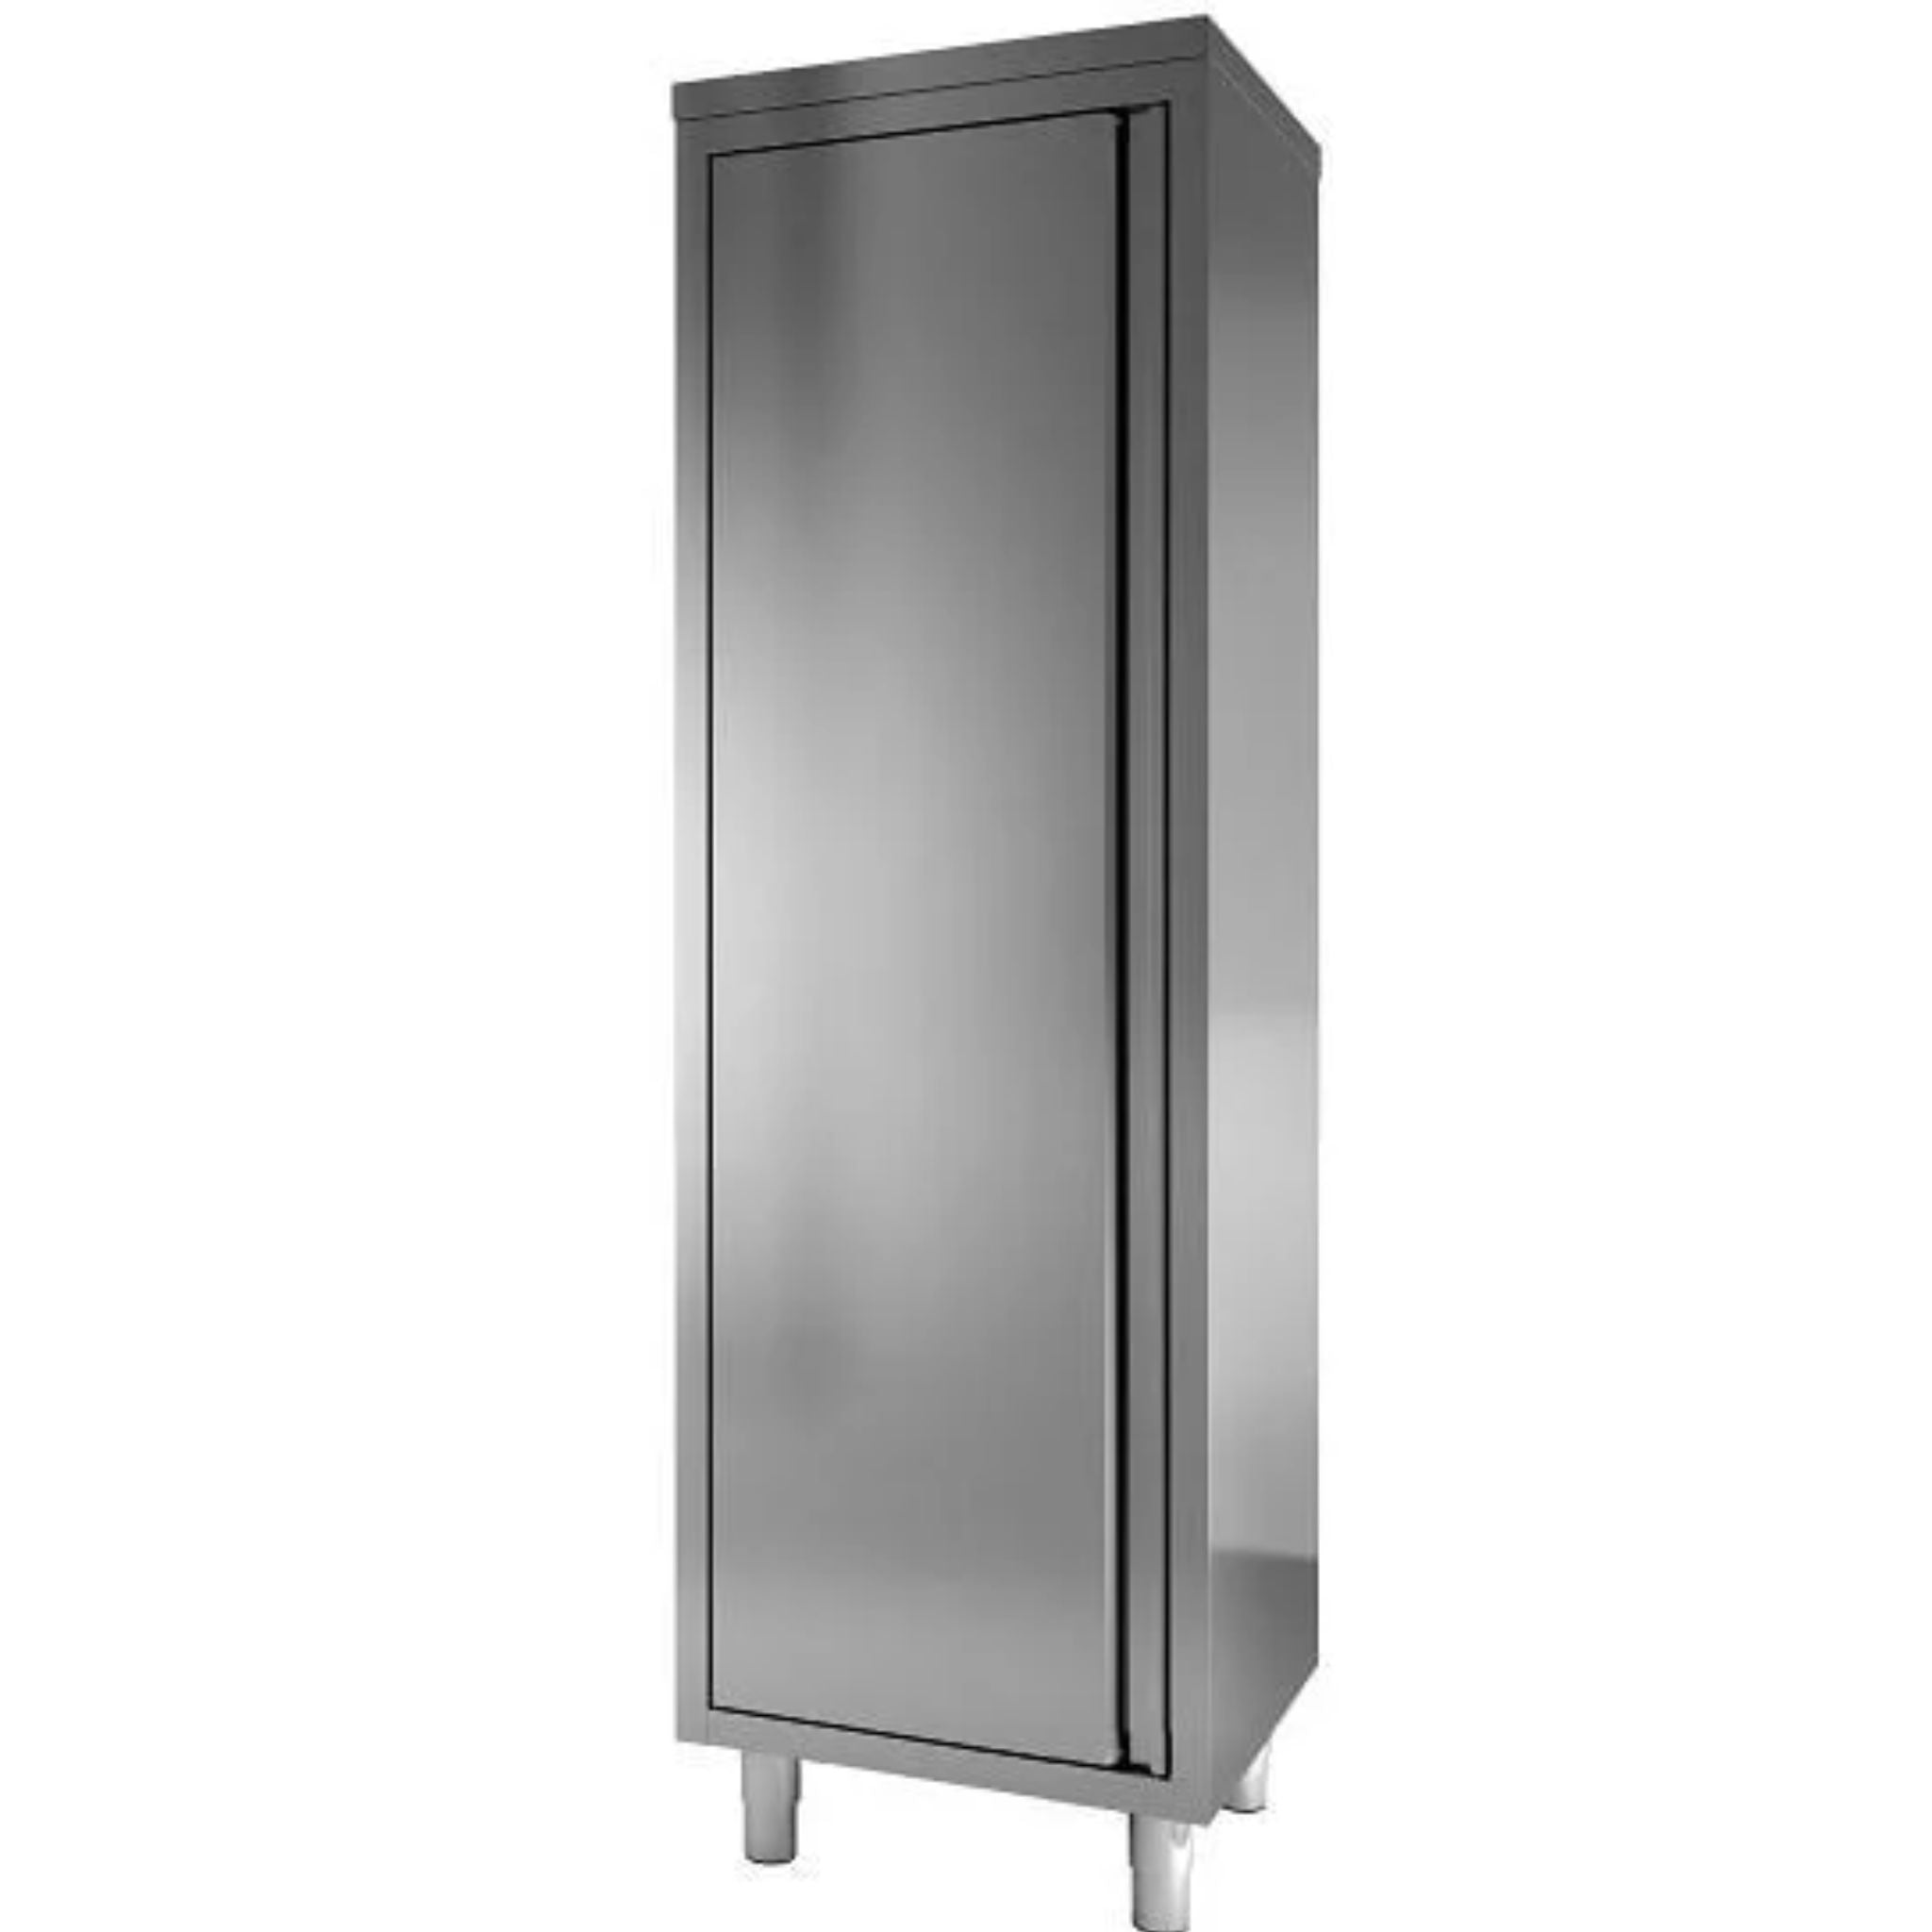 Stainless steel cabinet with hinged door Standard - 0